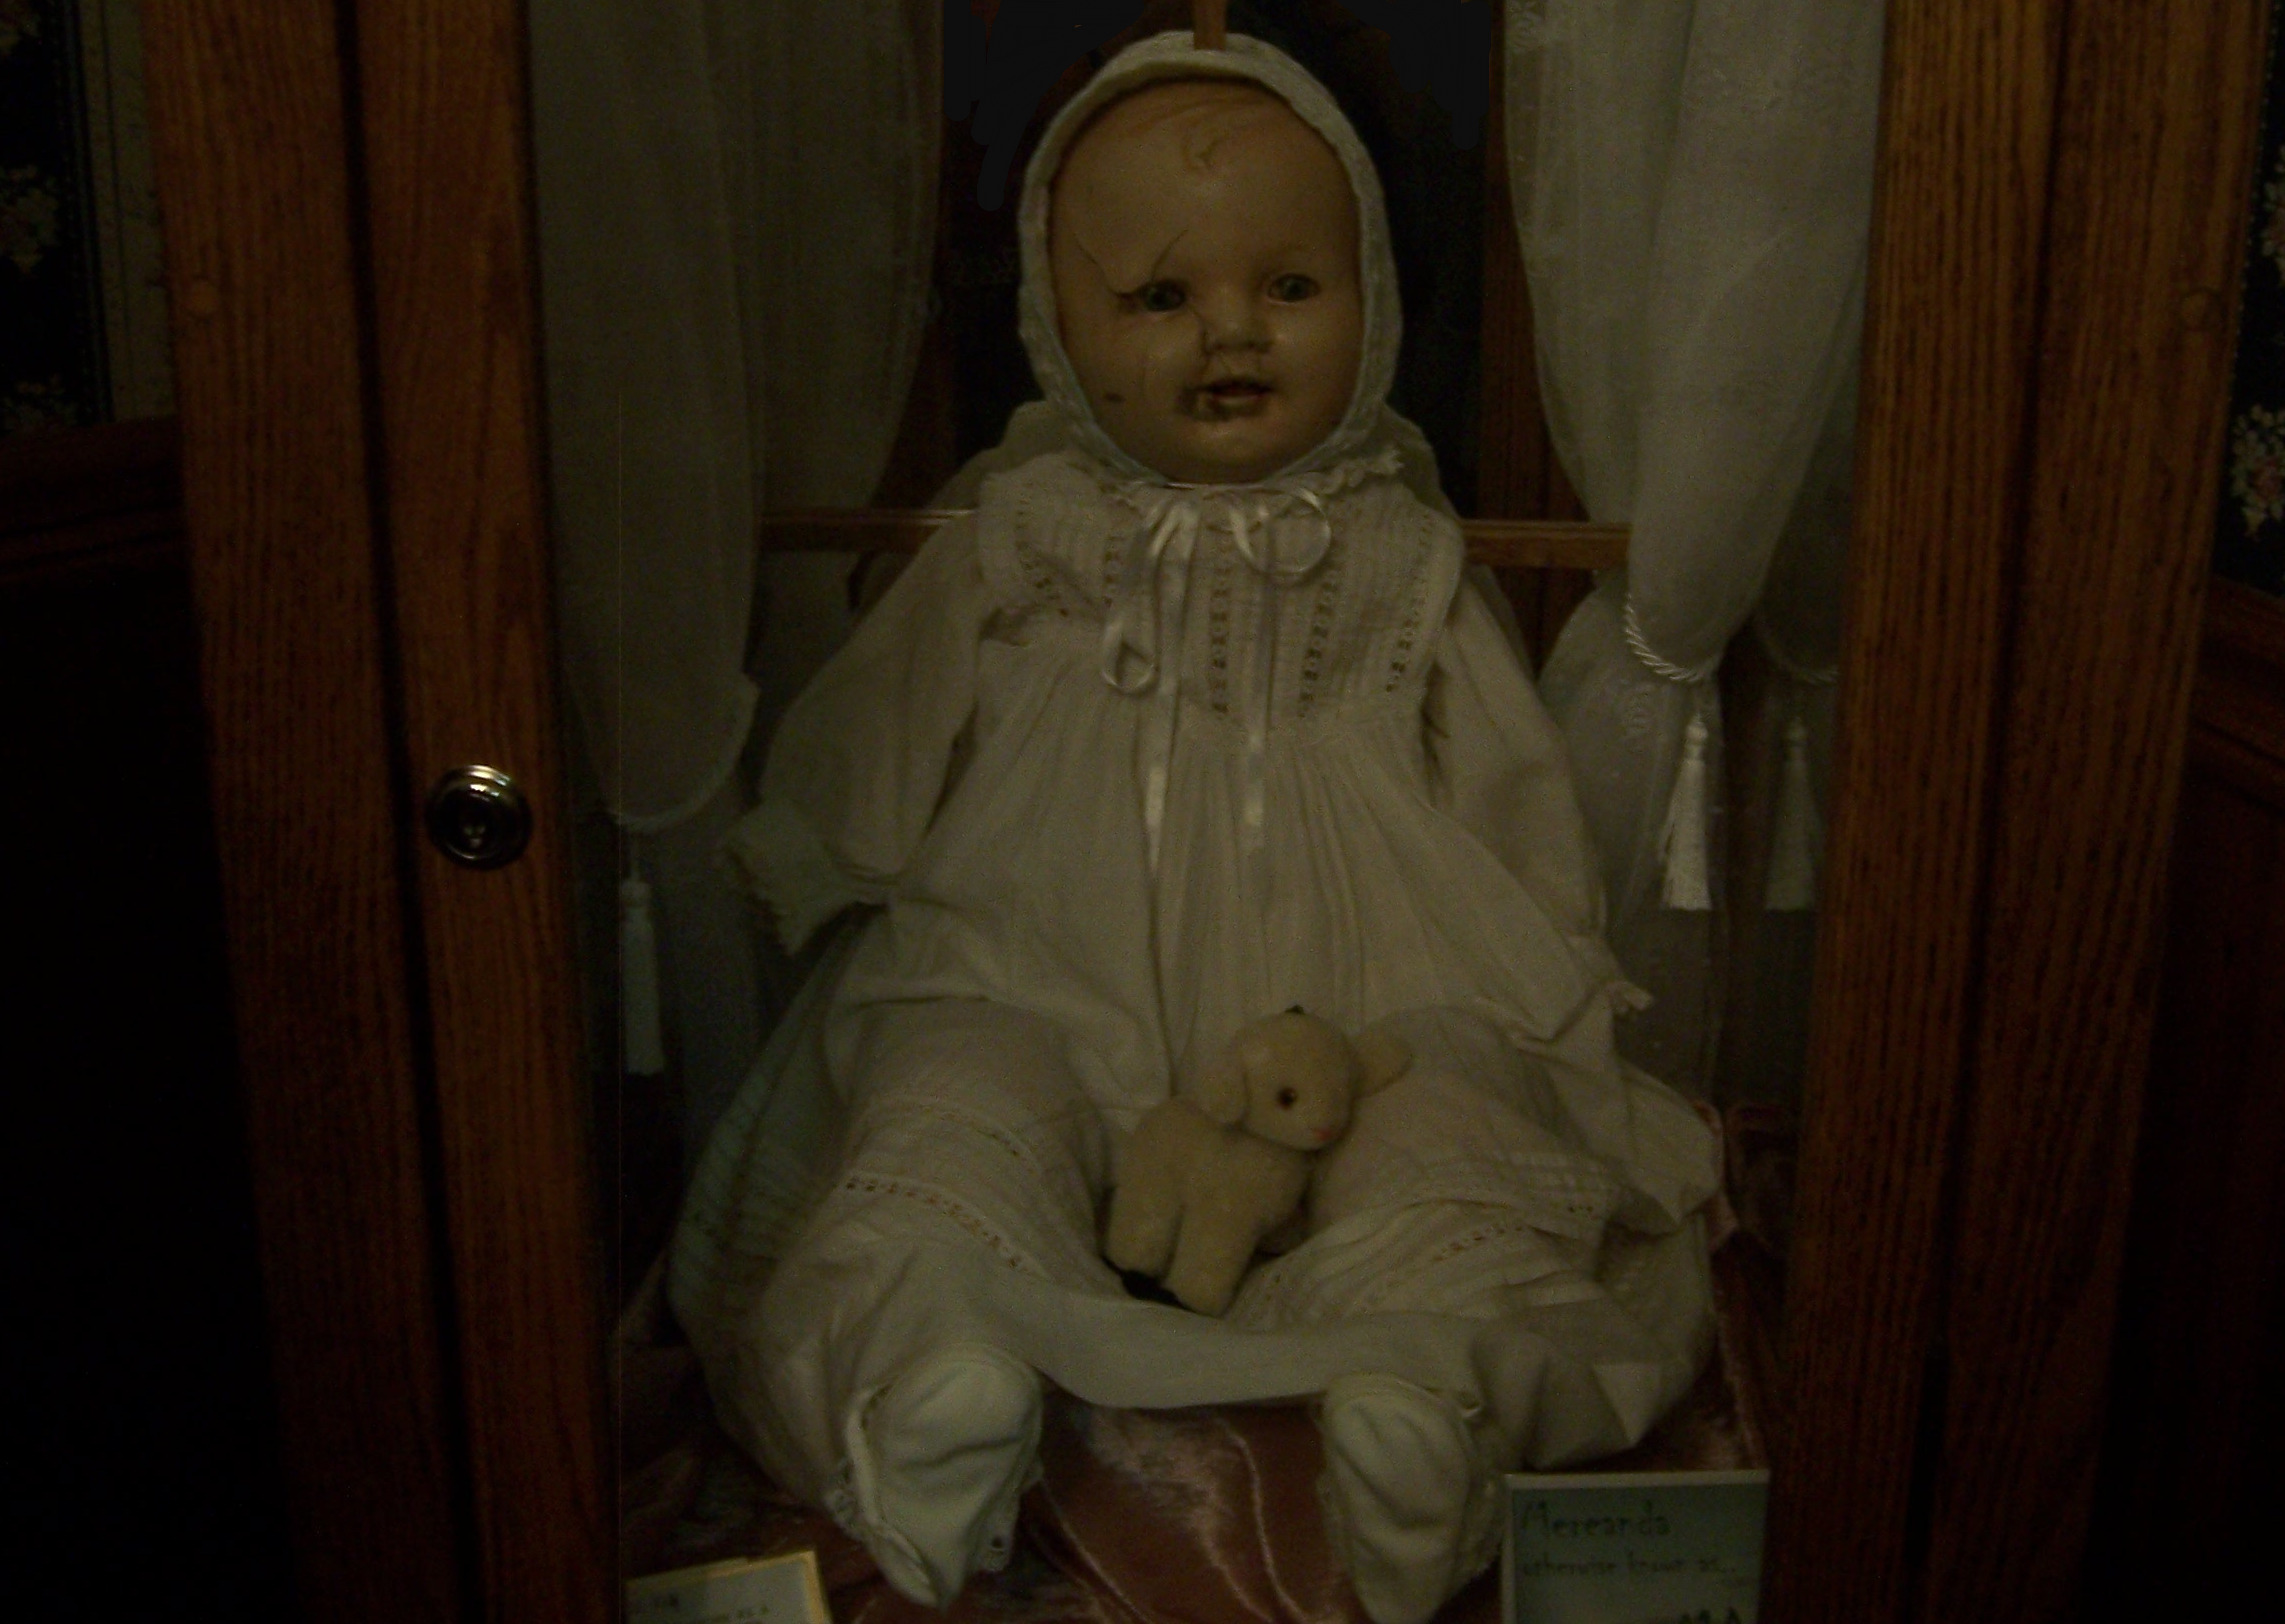 Cursed Mandy the doll